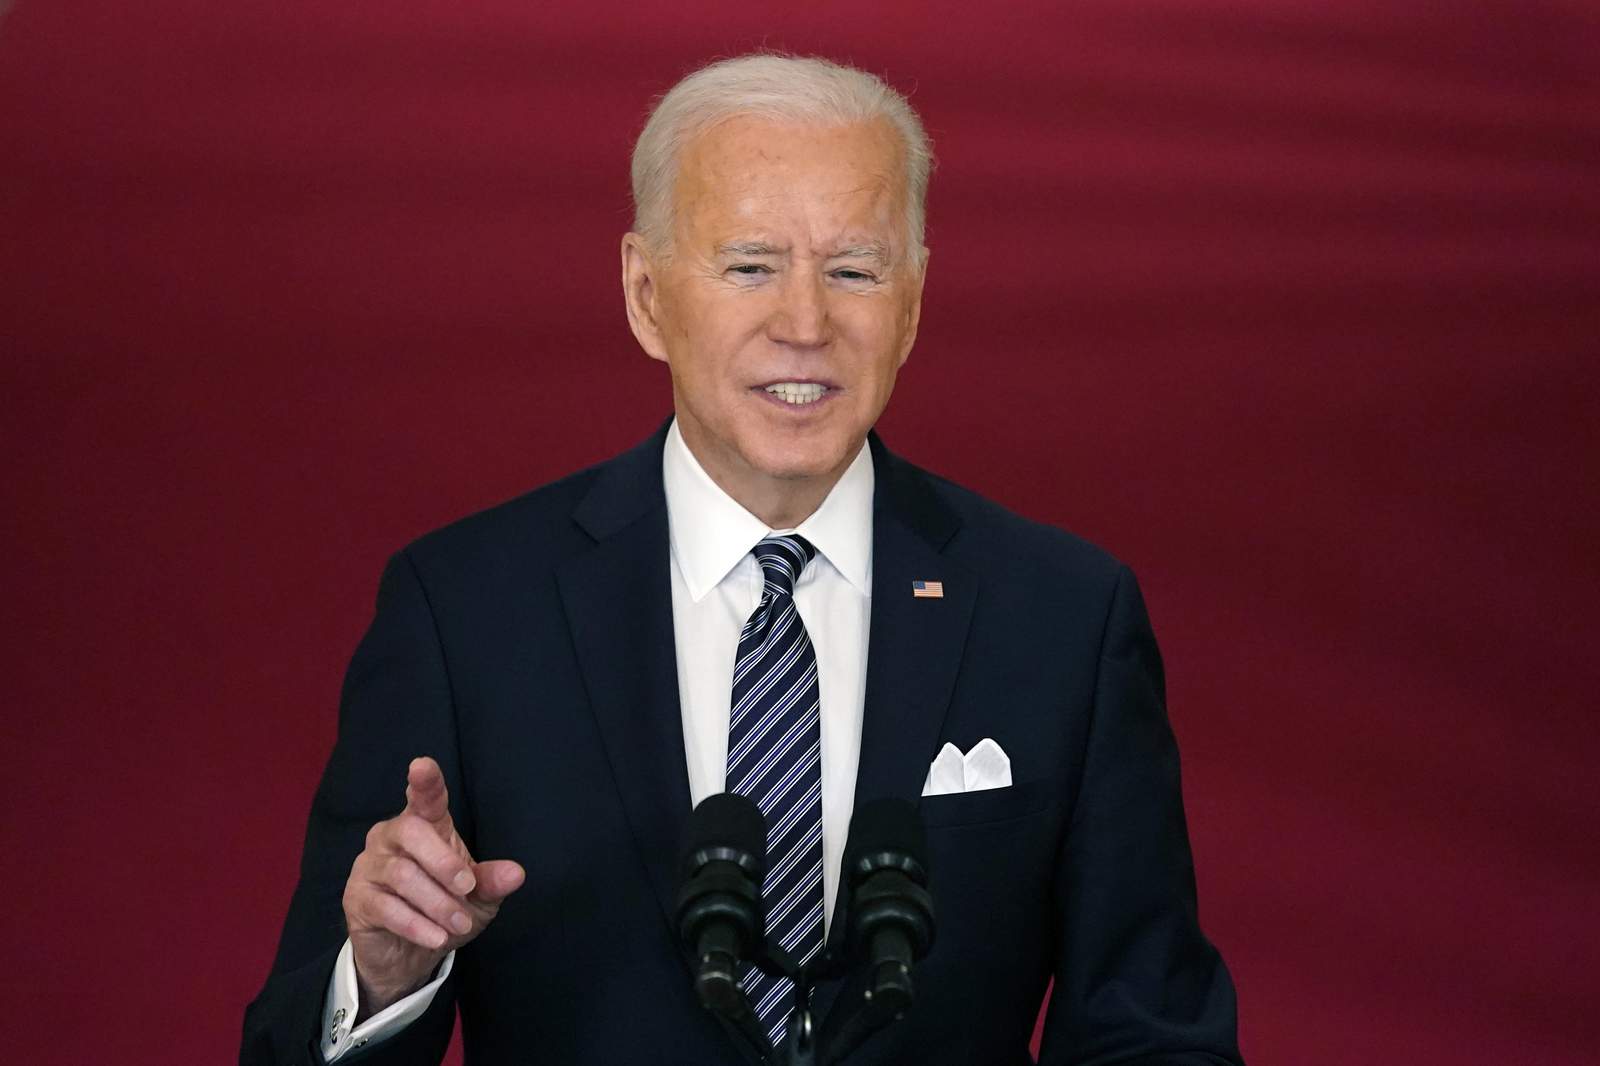 Biden aims for quicker shots, 'independence from this virus'